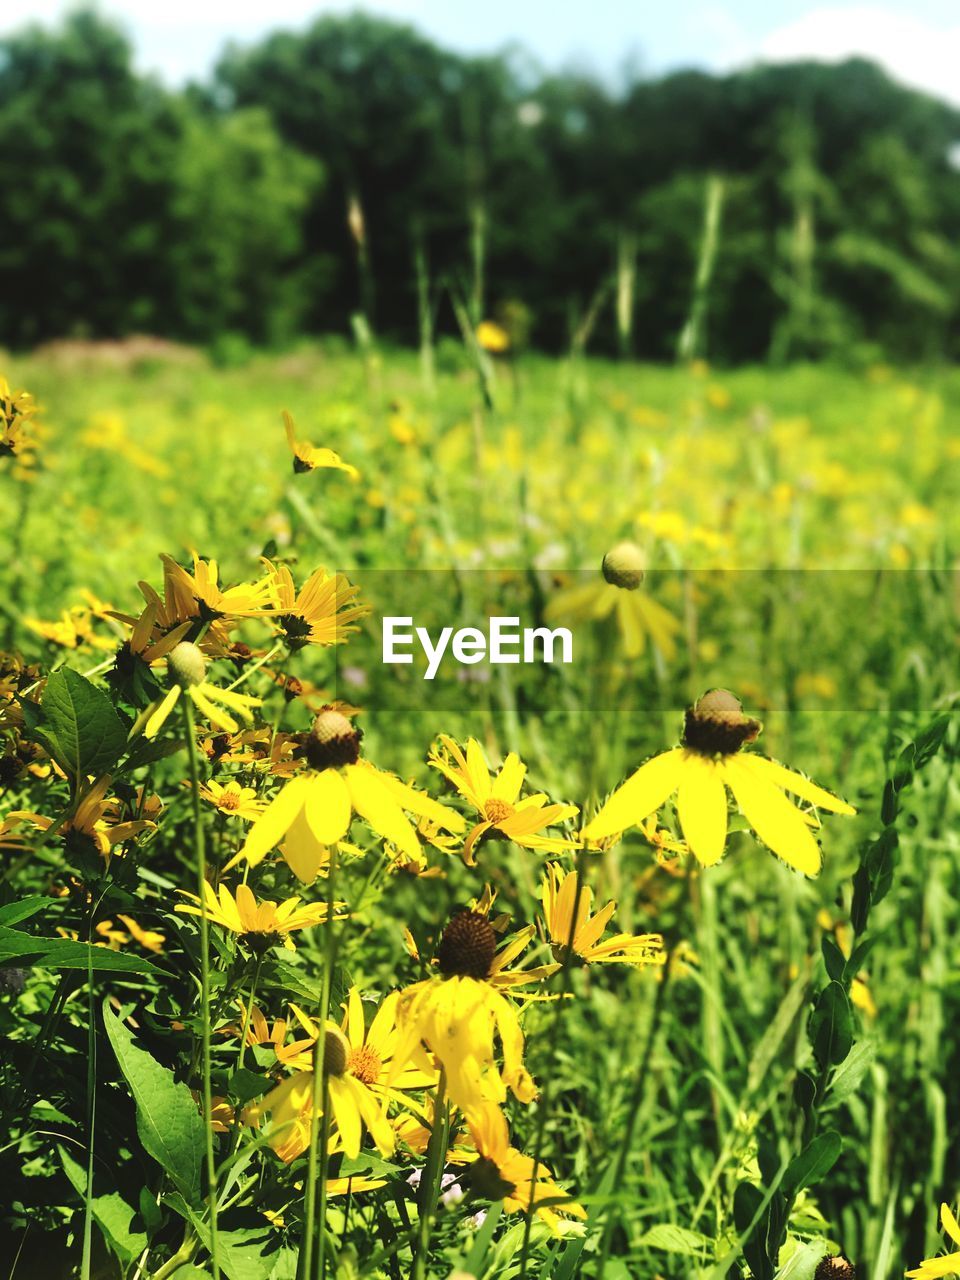 YELLOW FLOWERS BLOOMING IN FIELD